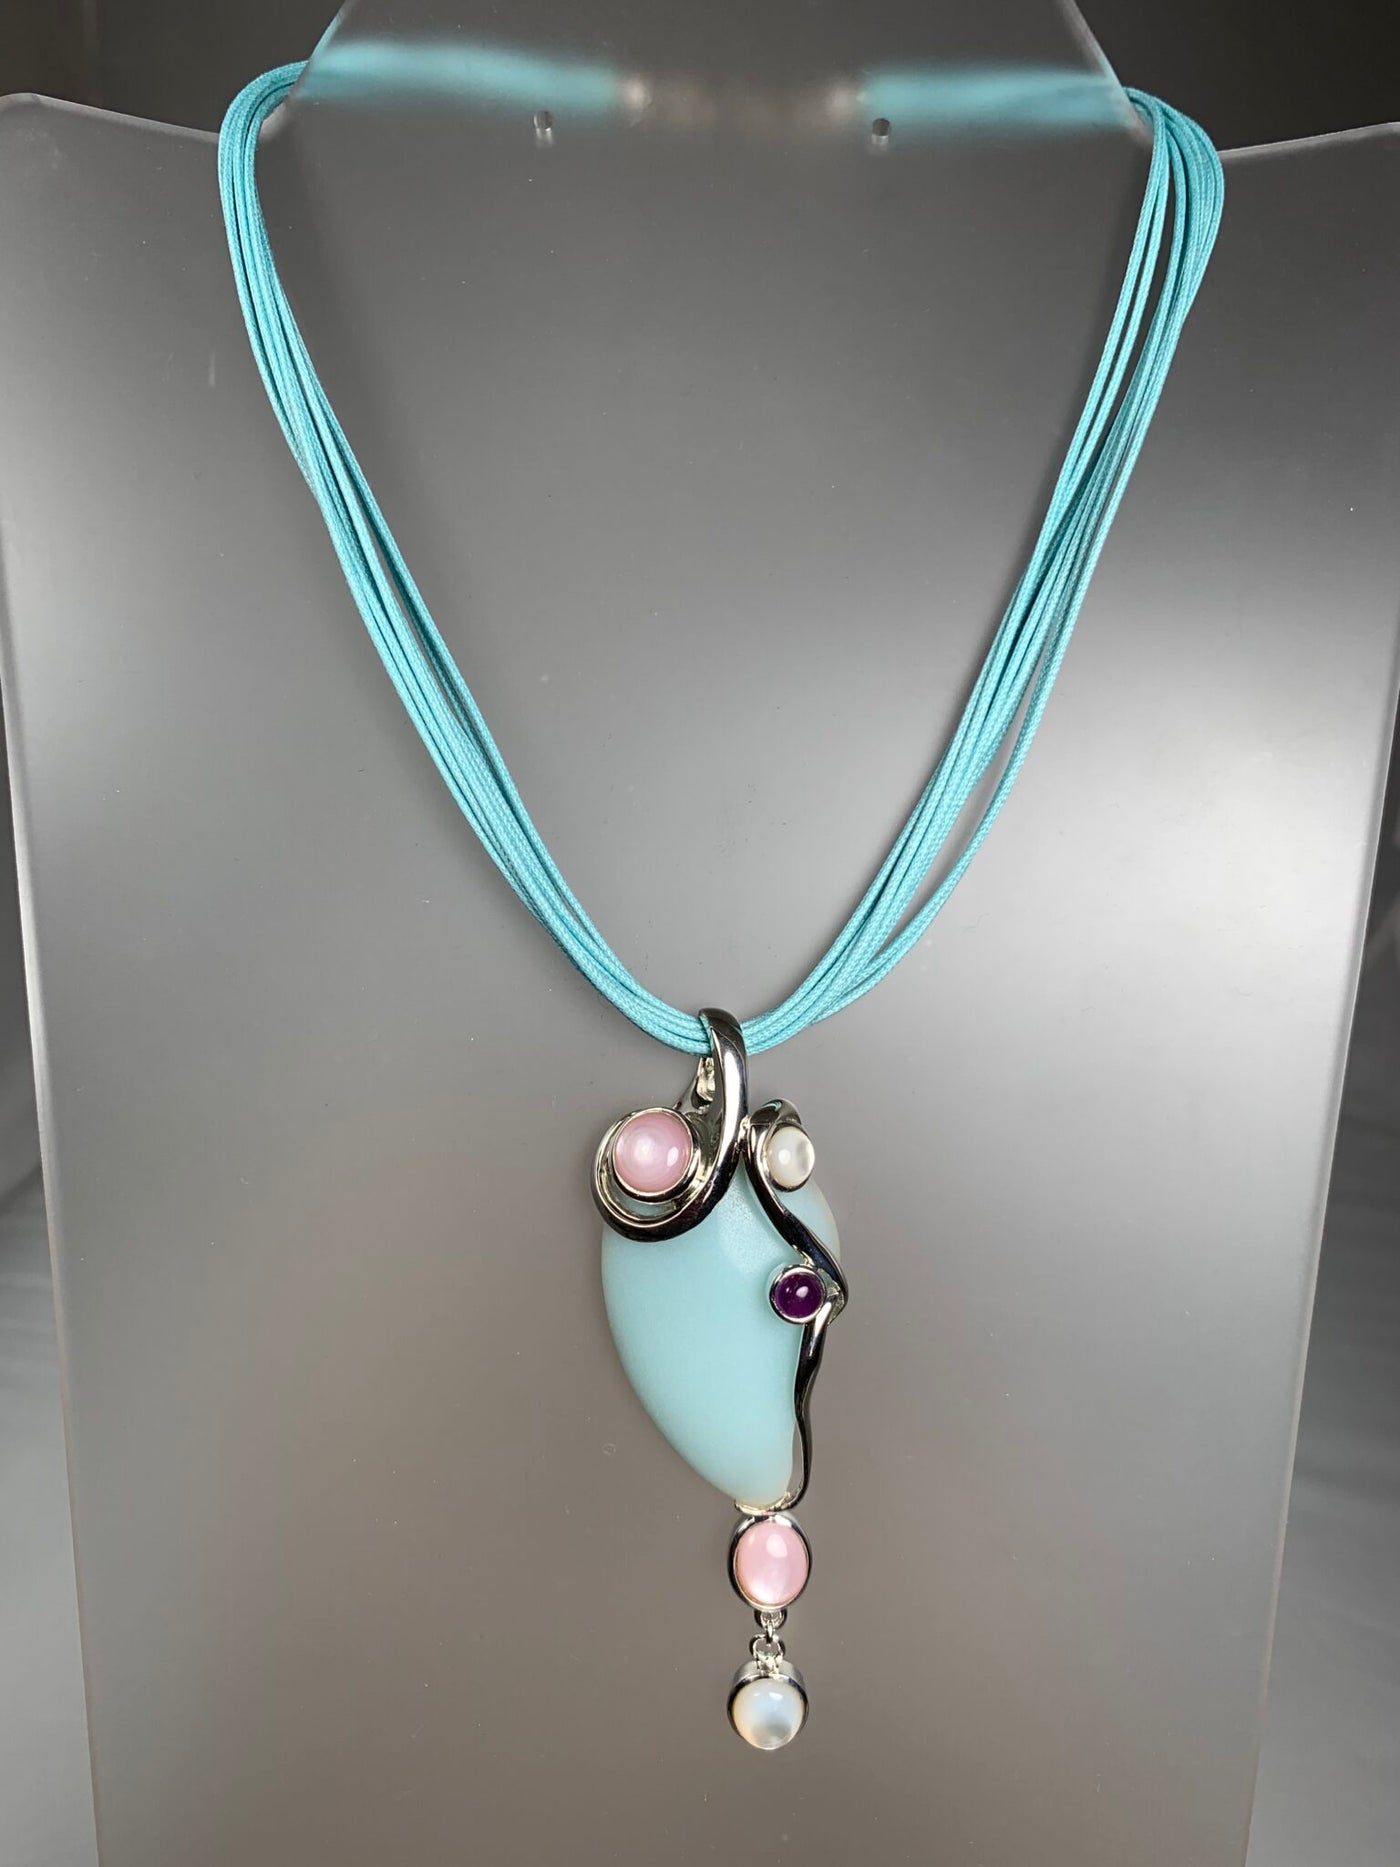 Sterling Silver Light Teal Blue10-Strand Cord Necklace from Italy 16"